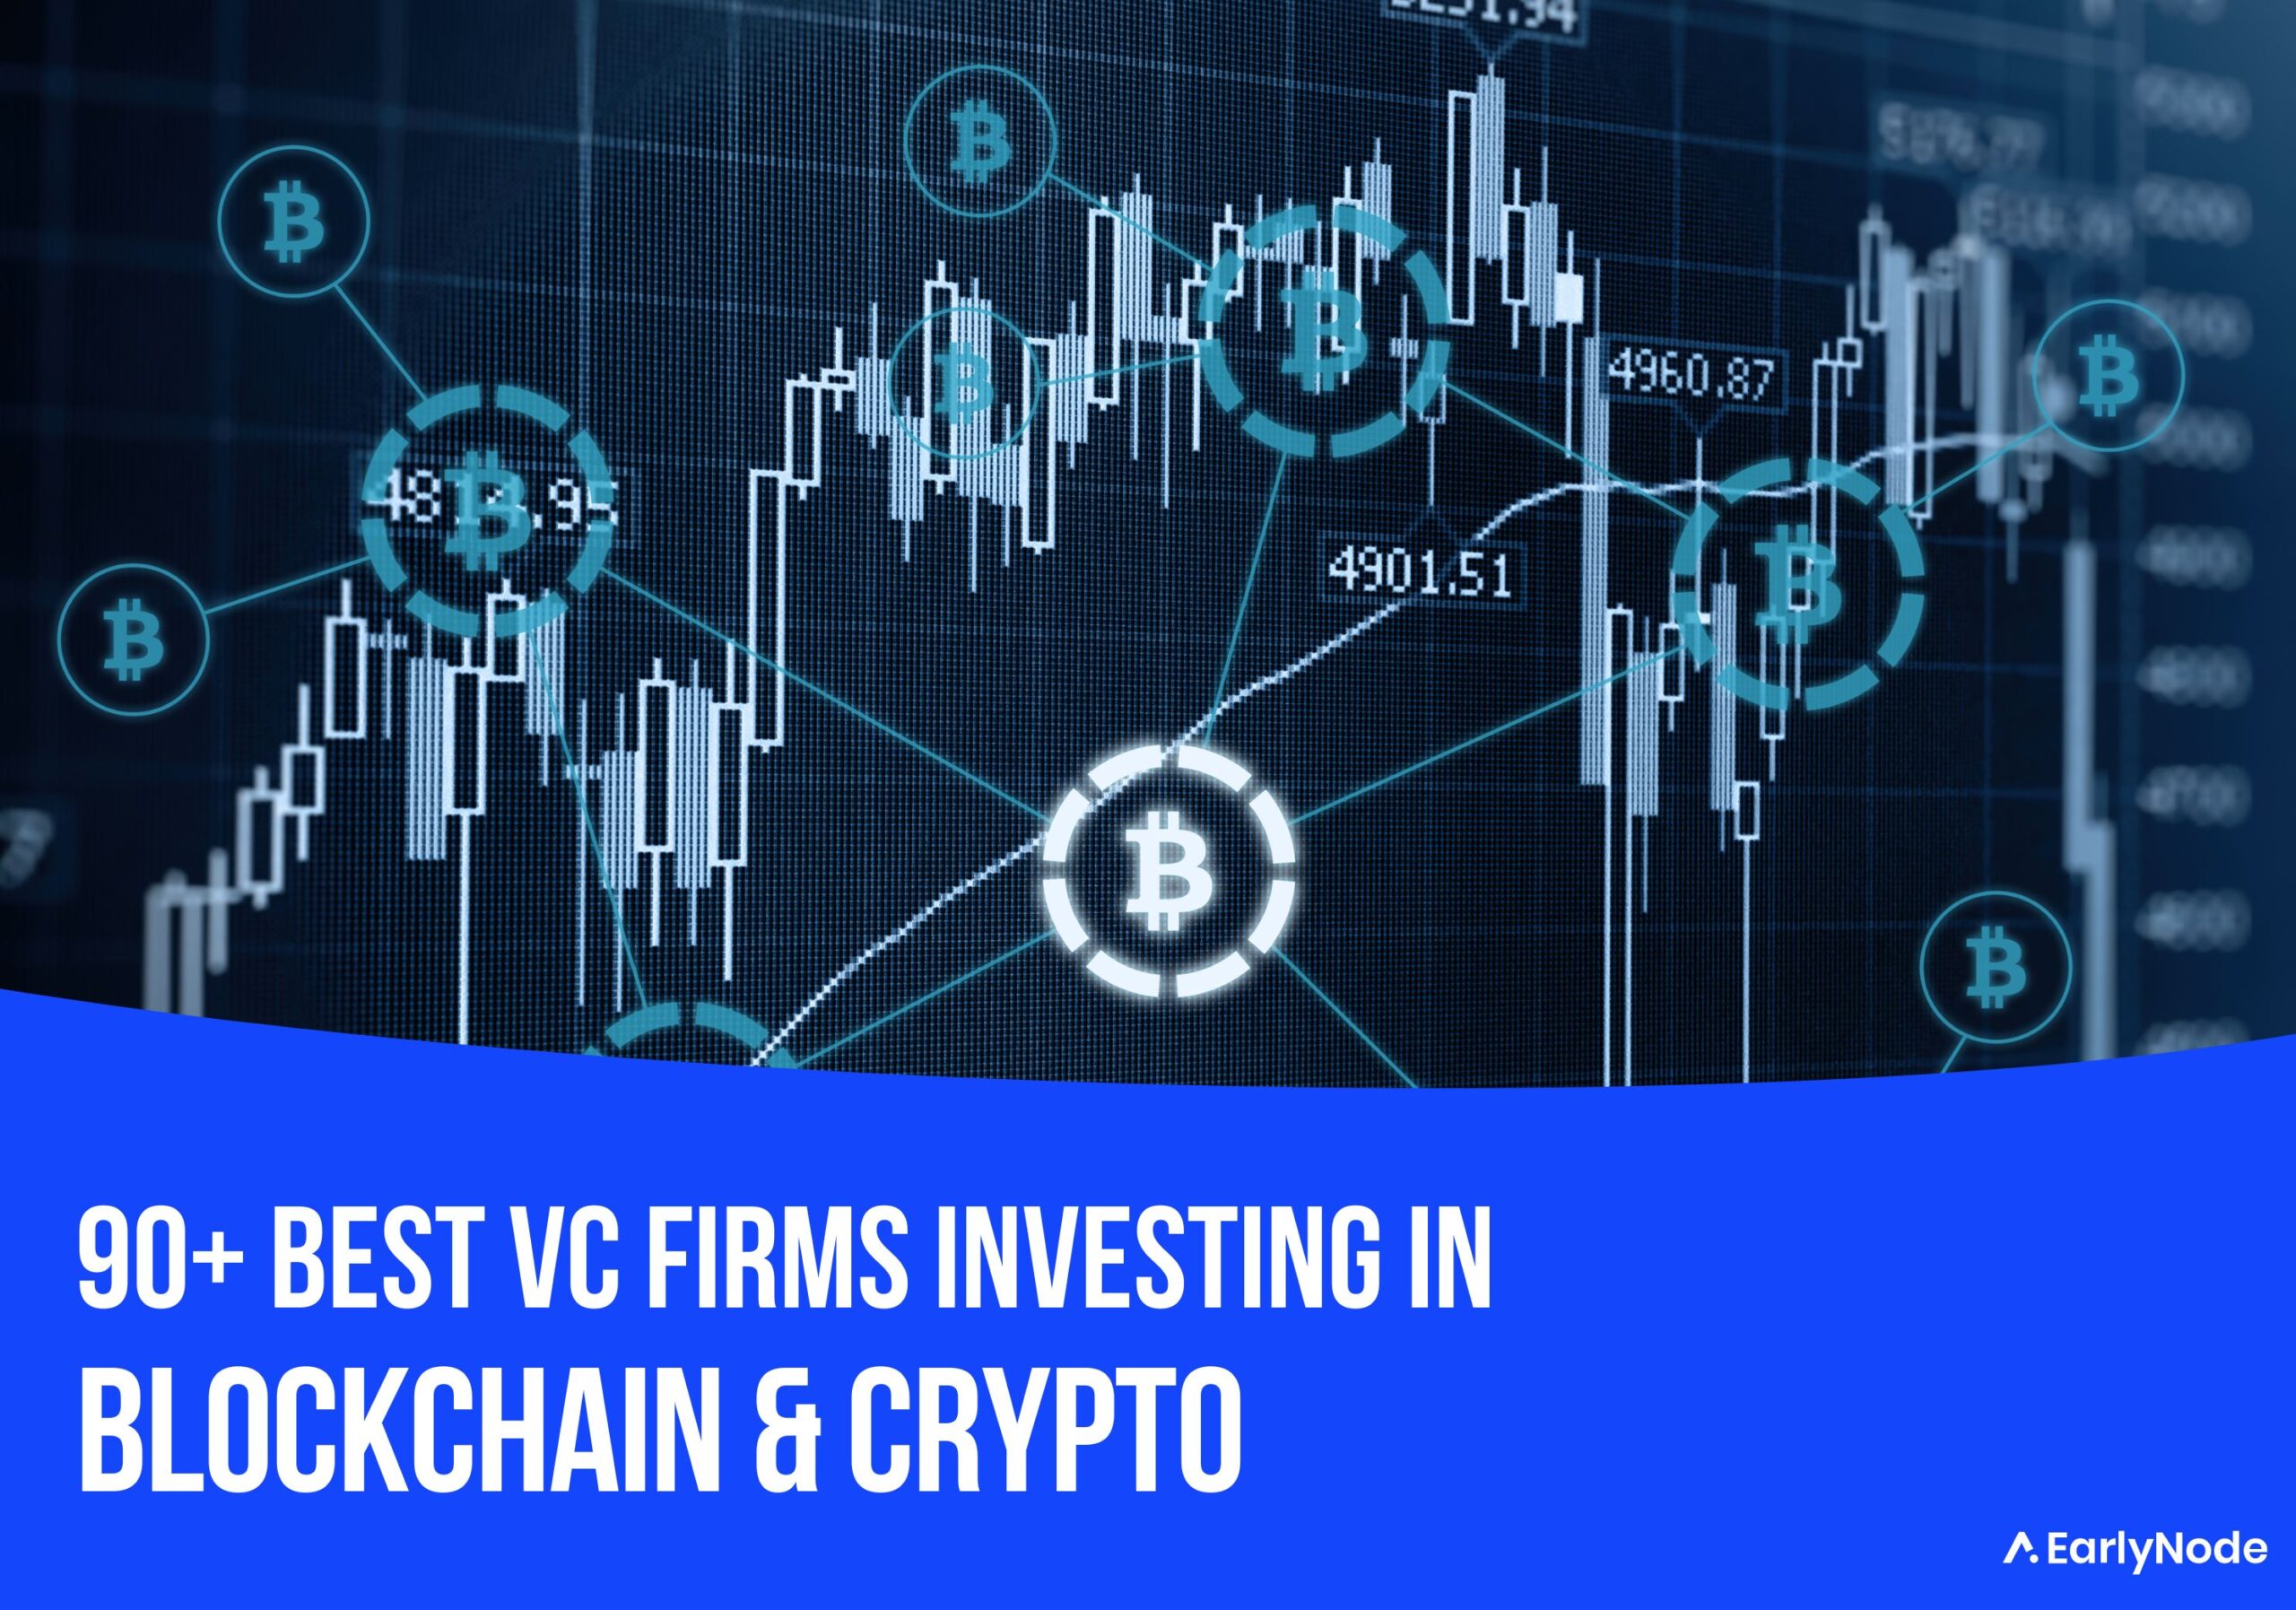 90+ Best Venture Capital (VC) Firms That Invest In Blockchain and Crypto Startups